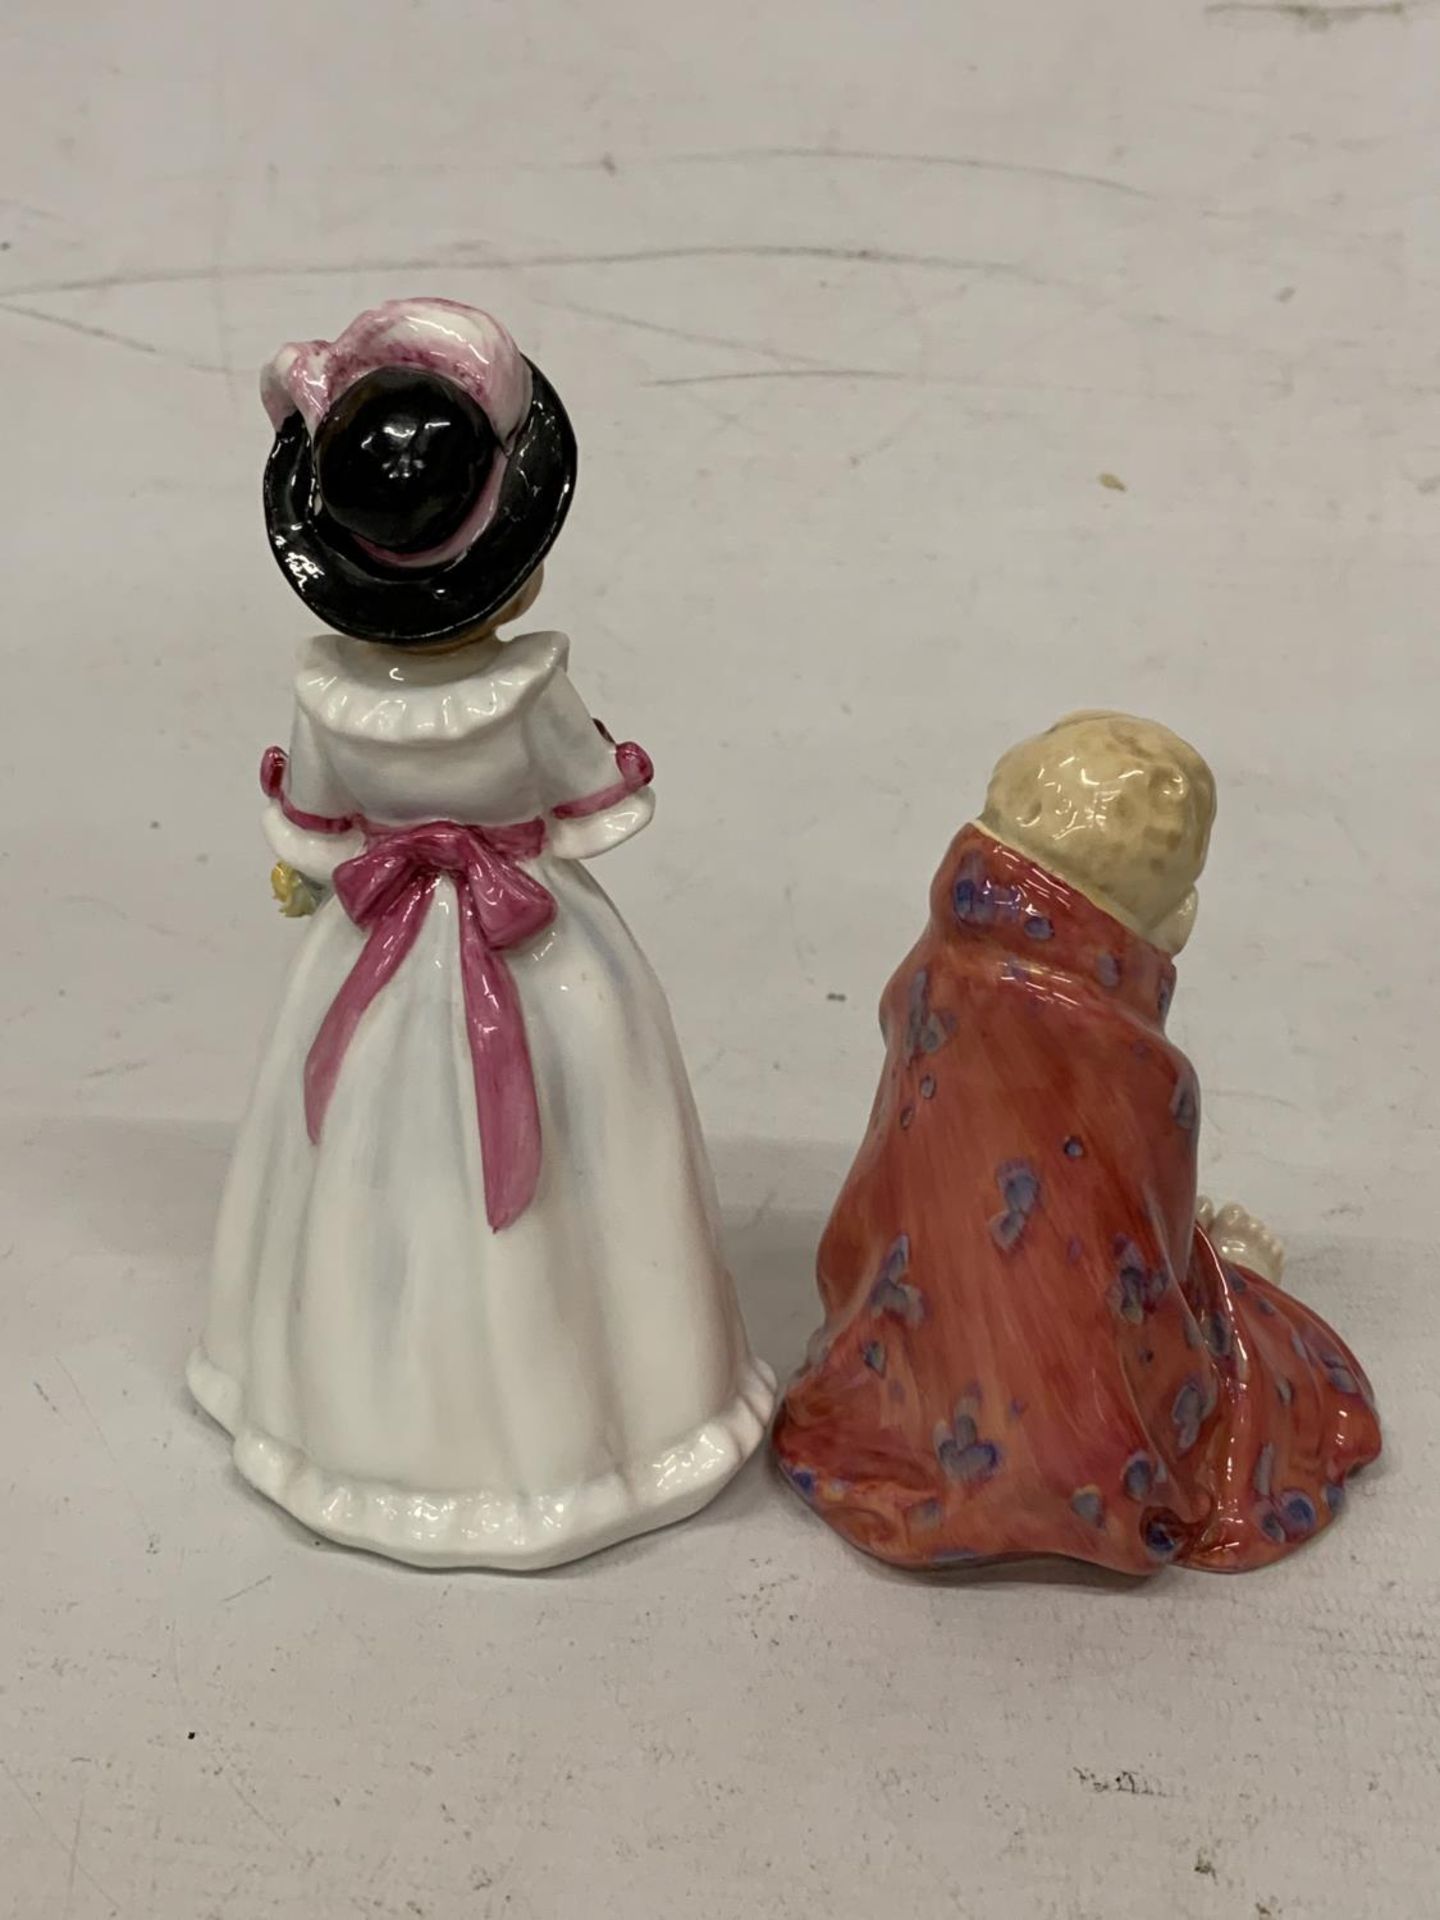 TWO ROYAL DOULTON FIGURES "THIS LITTLE PIG" HN 1793 AND "SHARON" HN 3047 - Bild 2 aus 3